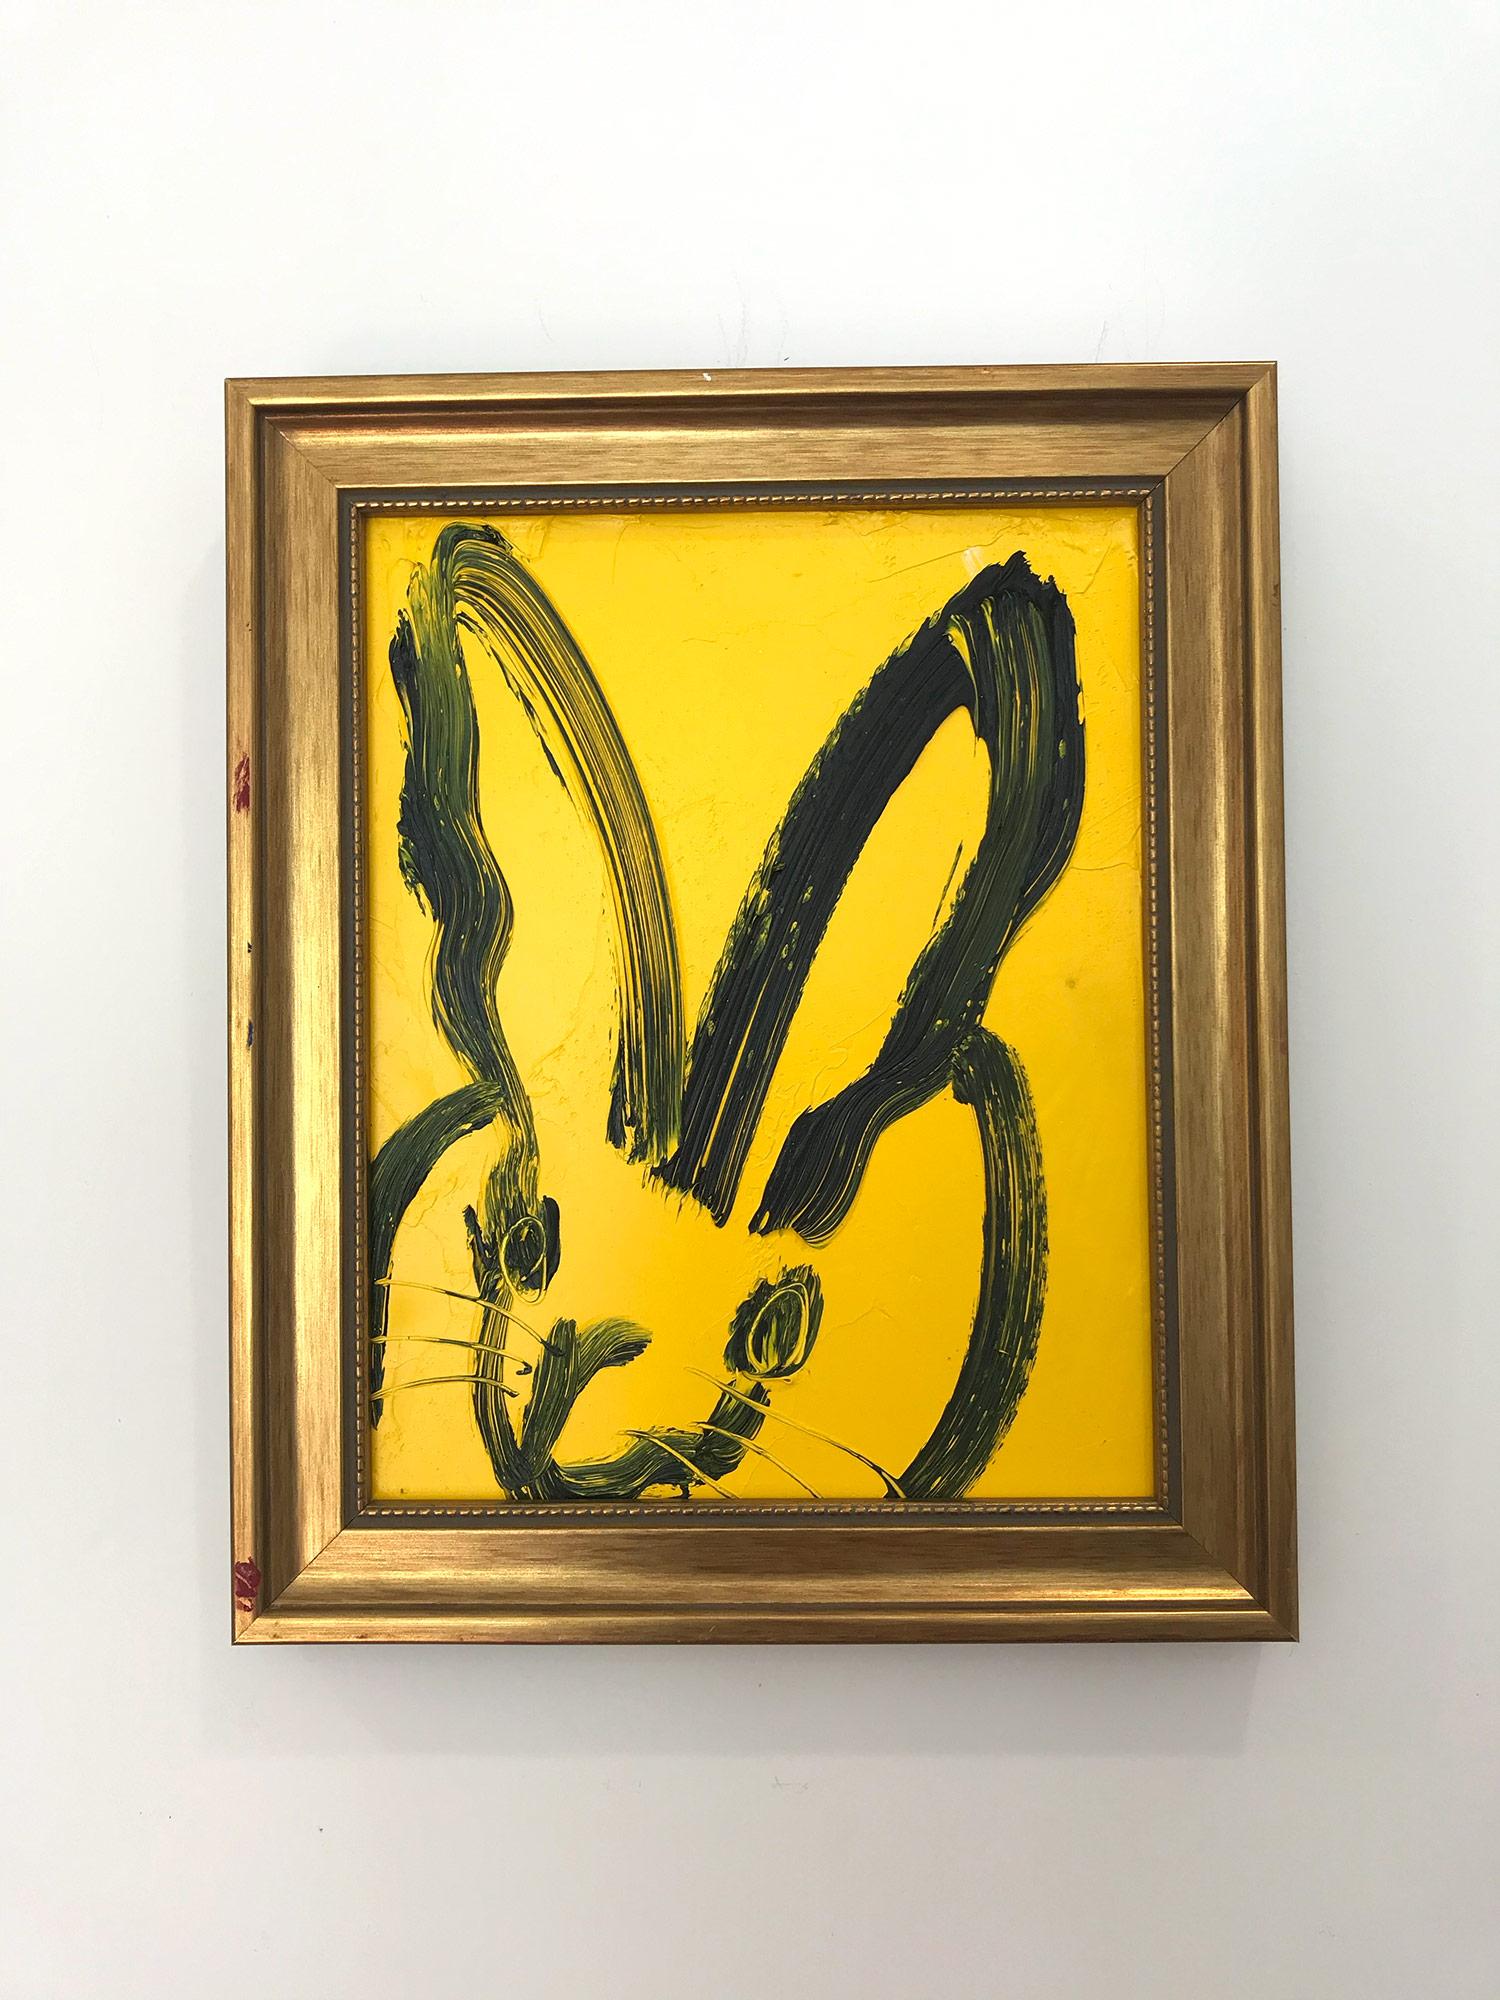 Untitled (Bunny on Royal Yellow) Oil Painting on Wood Panel 8